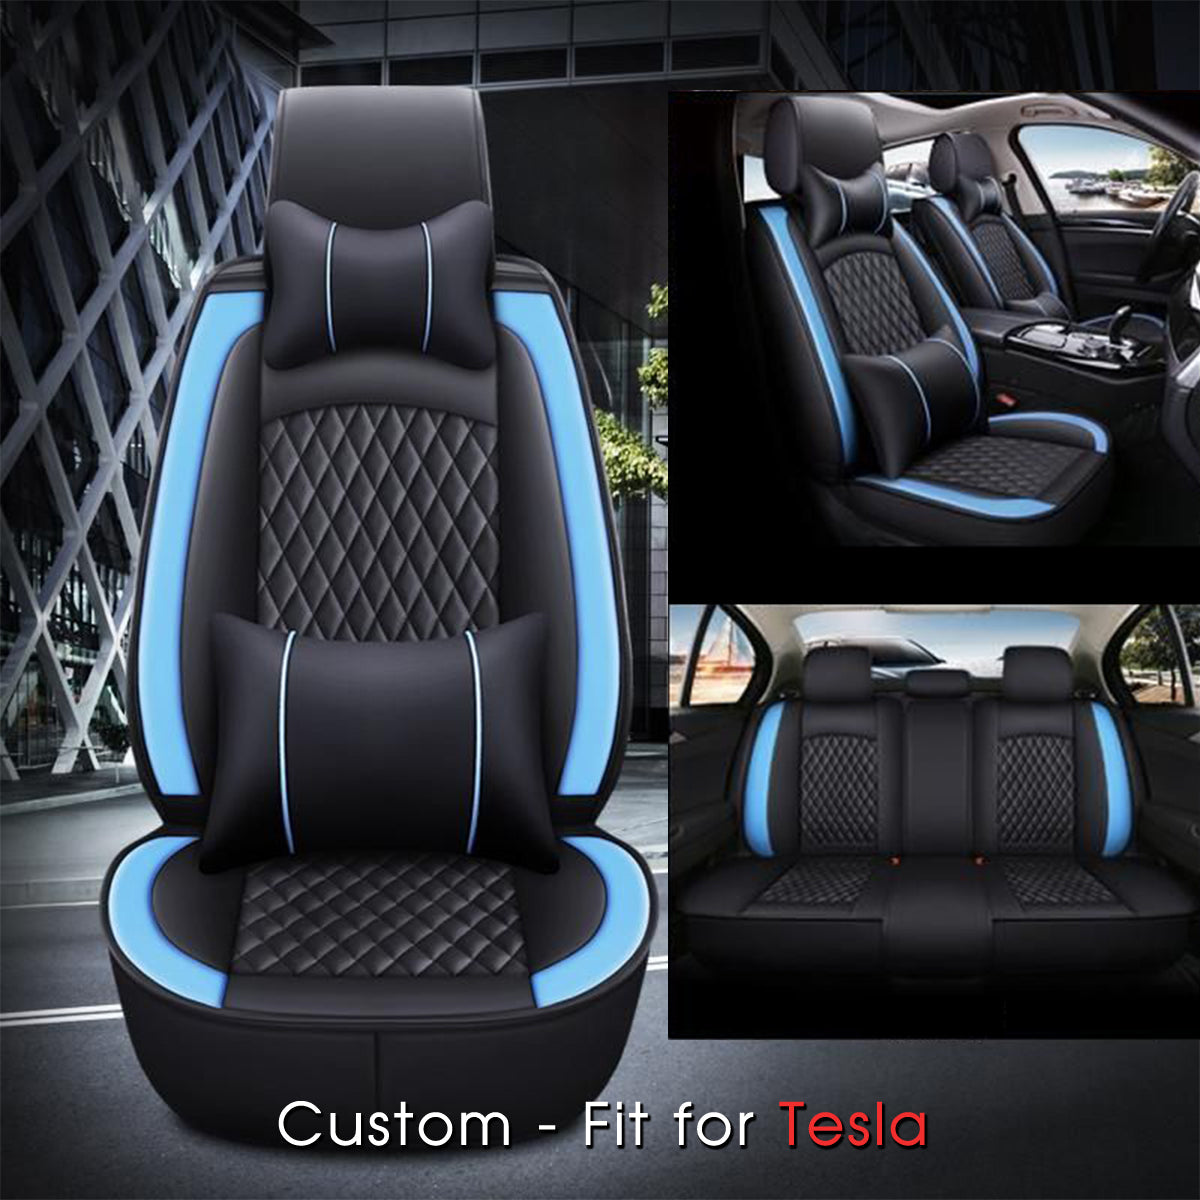 2 Car Seat Covers Full Set, Custom-Fit For Car, Waterproof Leather Front Rear Seat Automotive Protection Cushions, Car Accessories WATY211